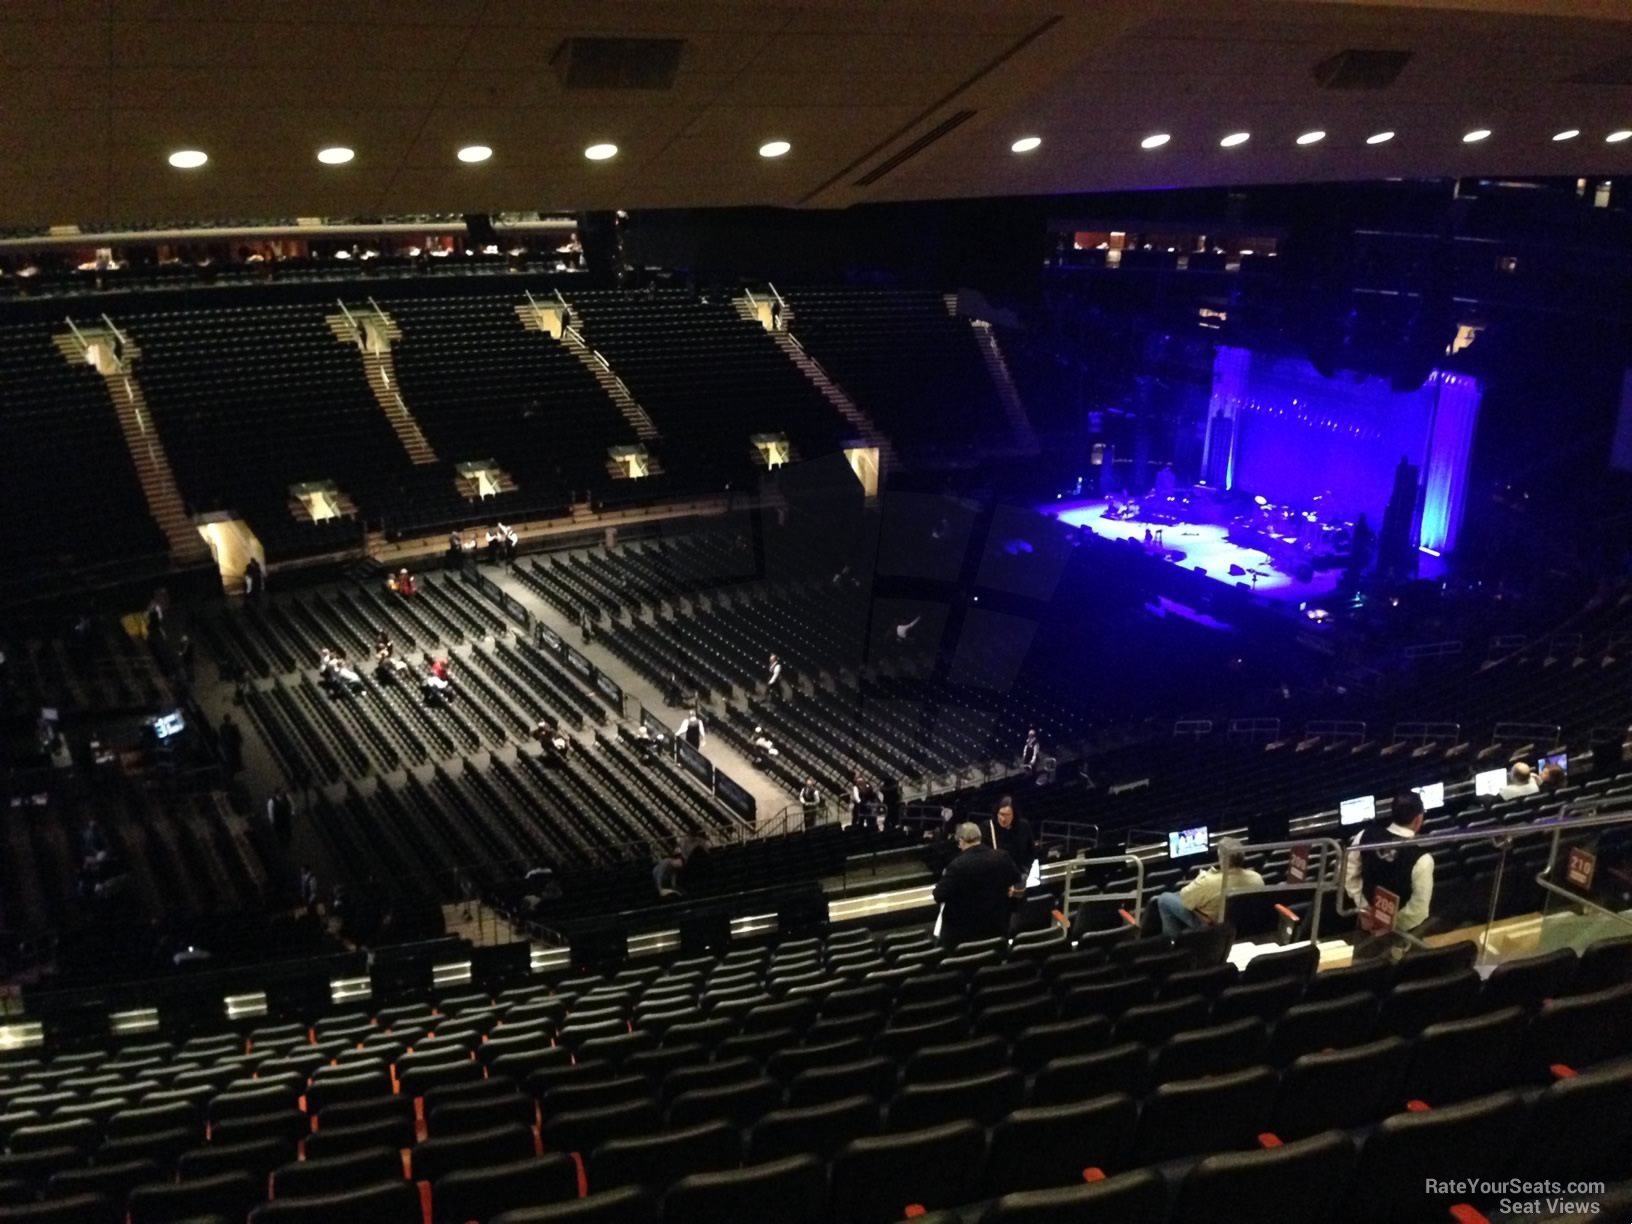 section 209, row 16 seat view  for concert - madison square garden